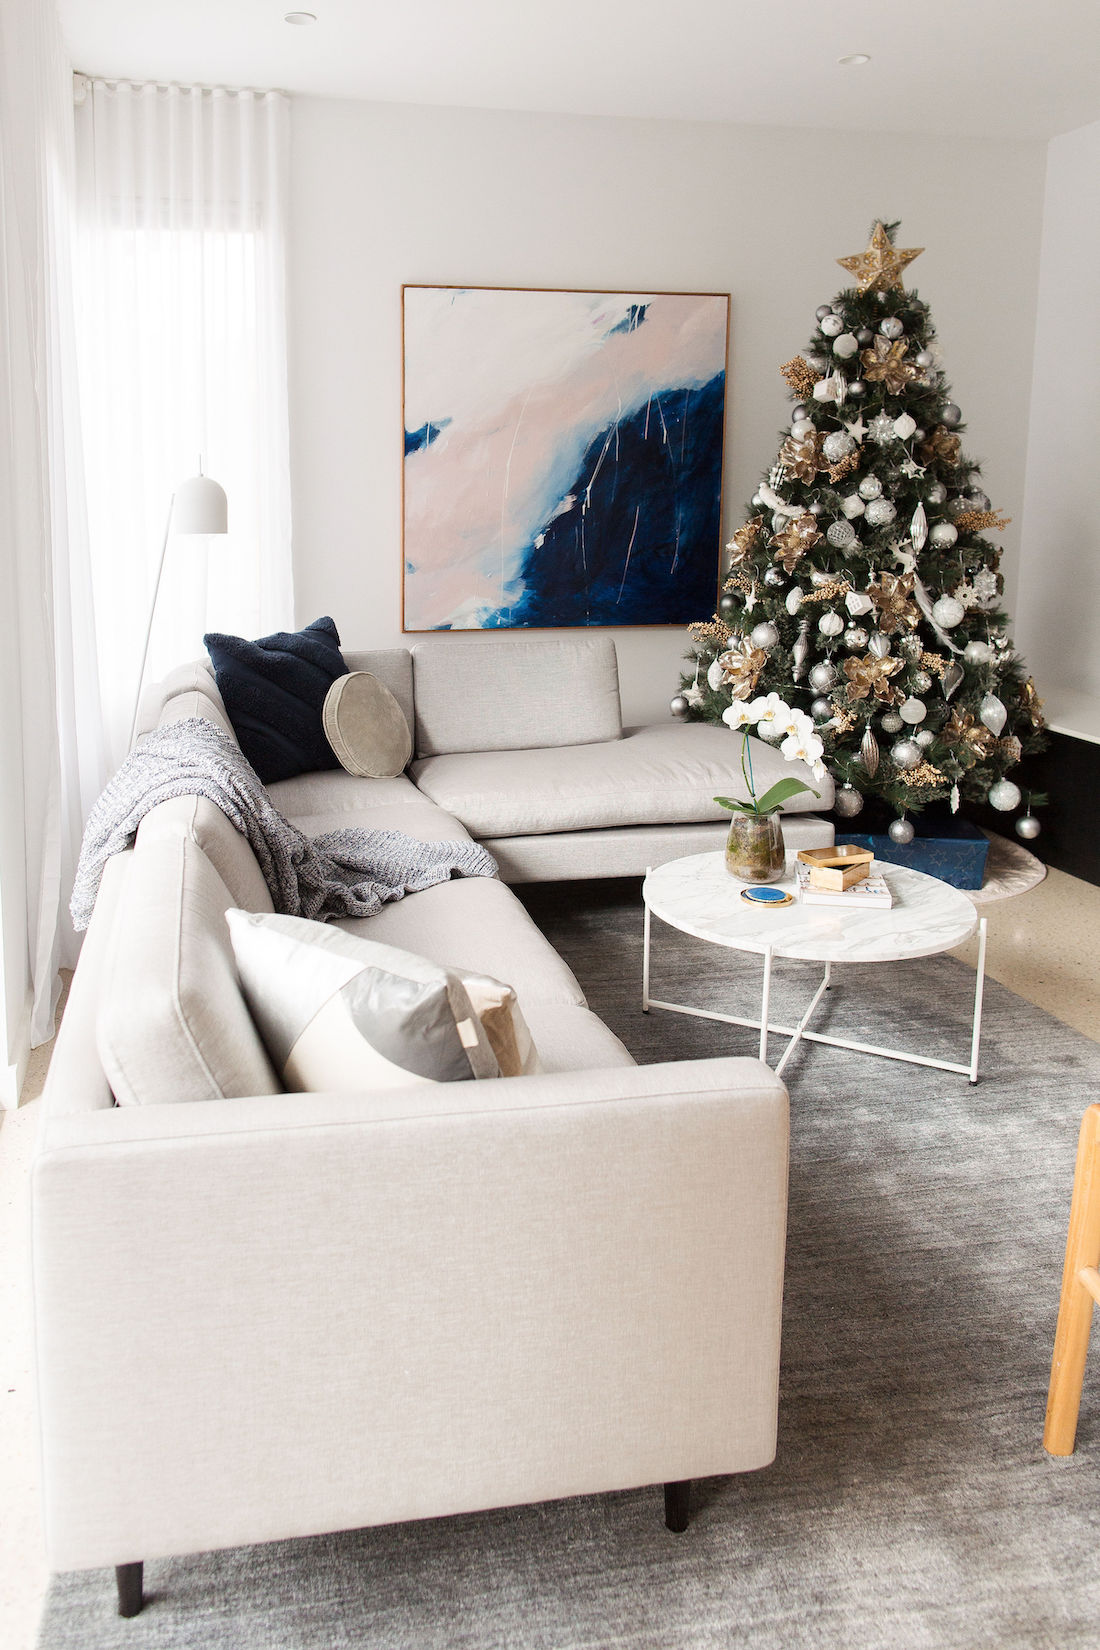 Decide on the right spot for your Christmas tree styling tips